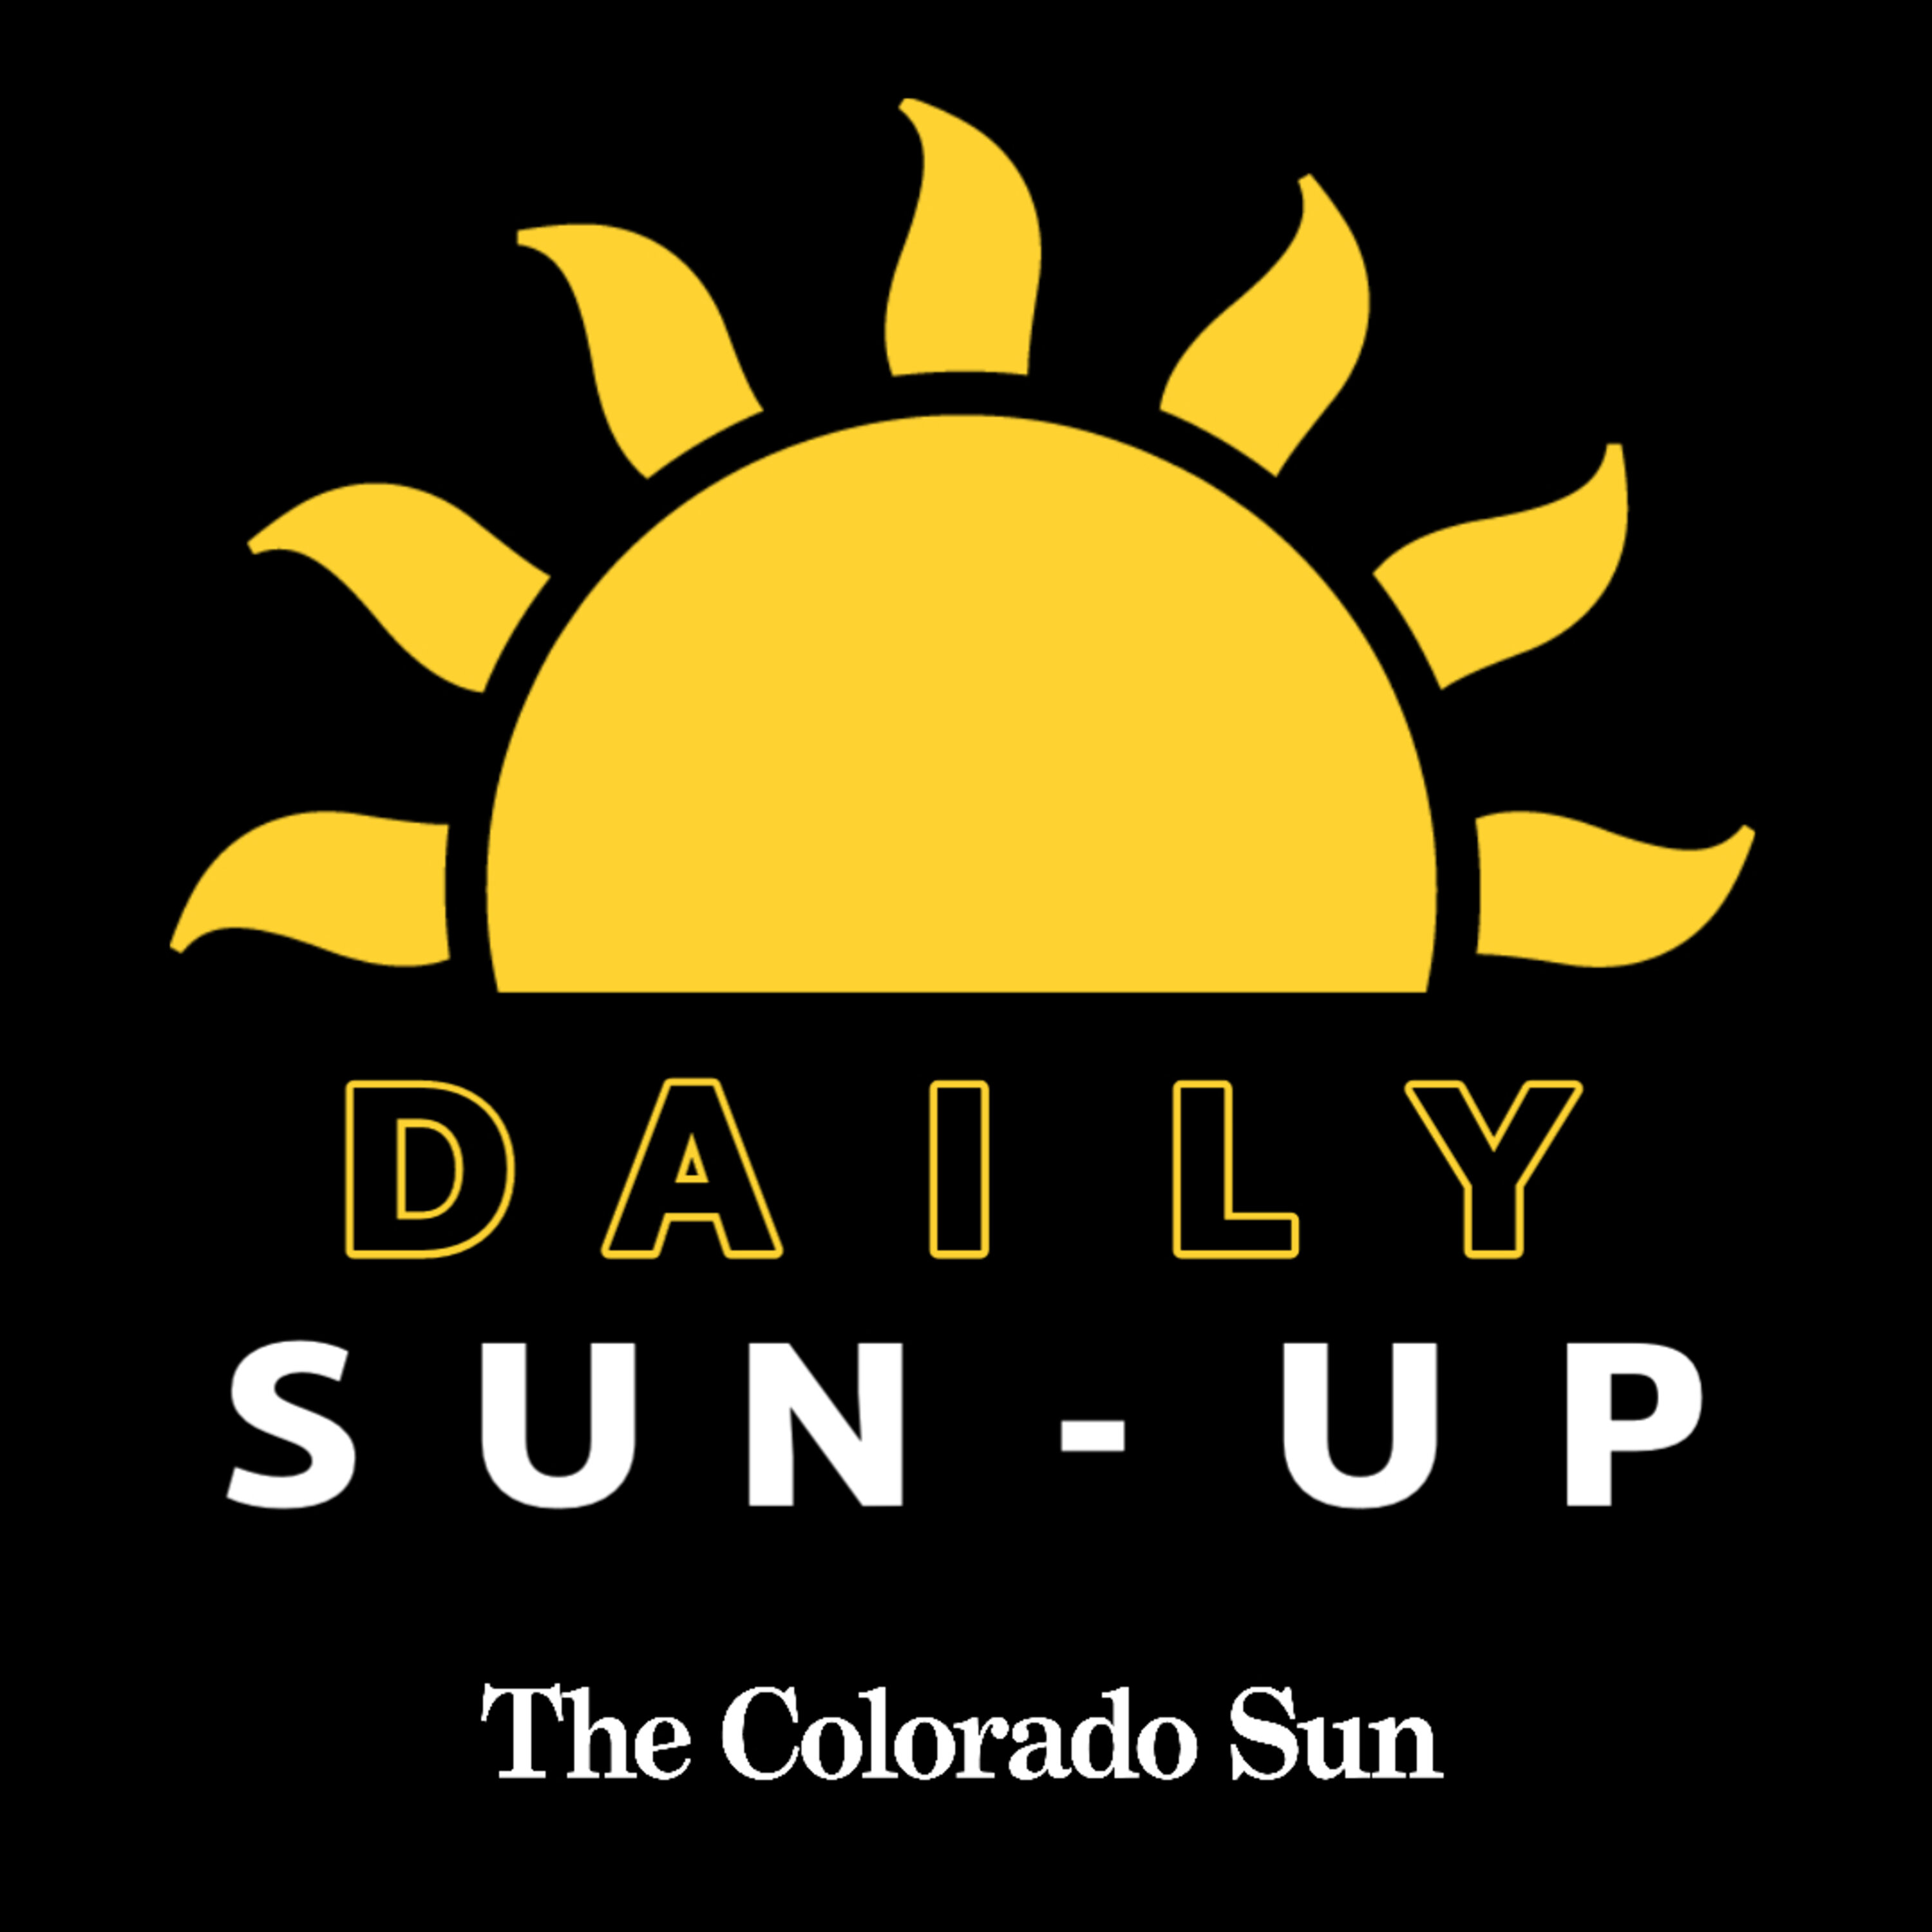 Colorado Sun Daily Sun-Up: Shooting in Boulder leaves 10 dead